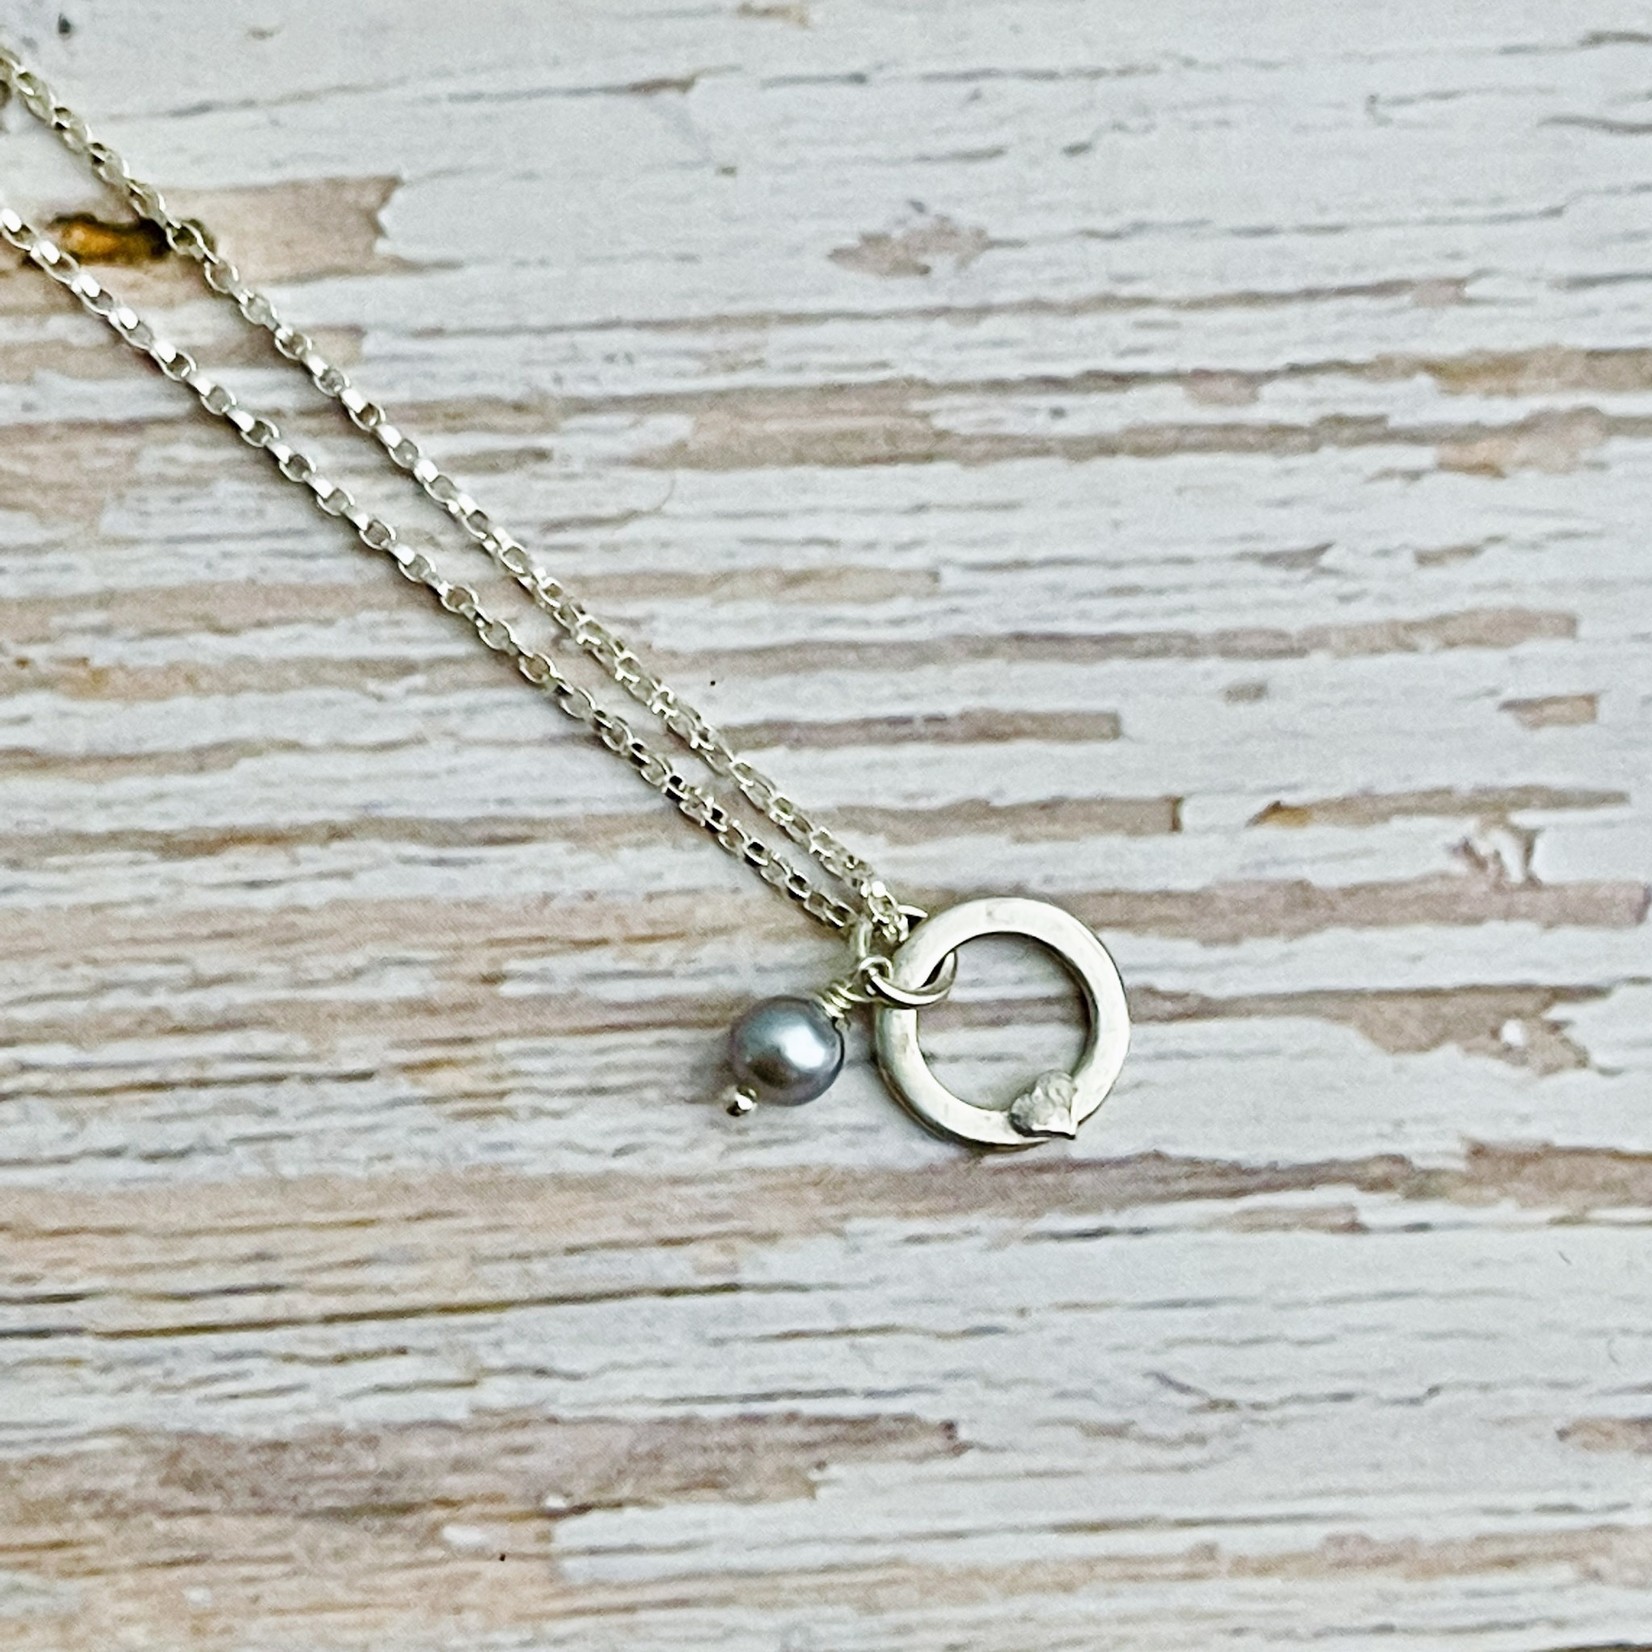 Handmade Silver Necklace with grey pearl, washer with silver heart